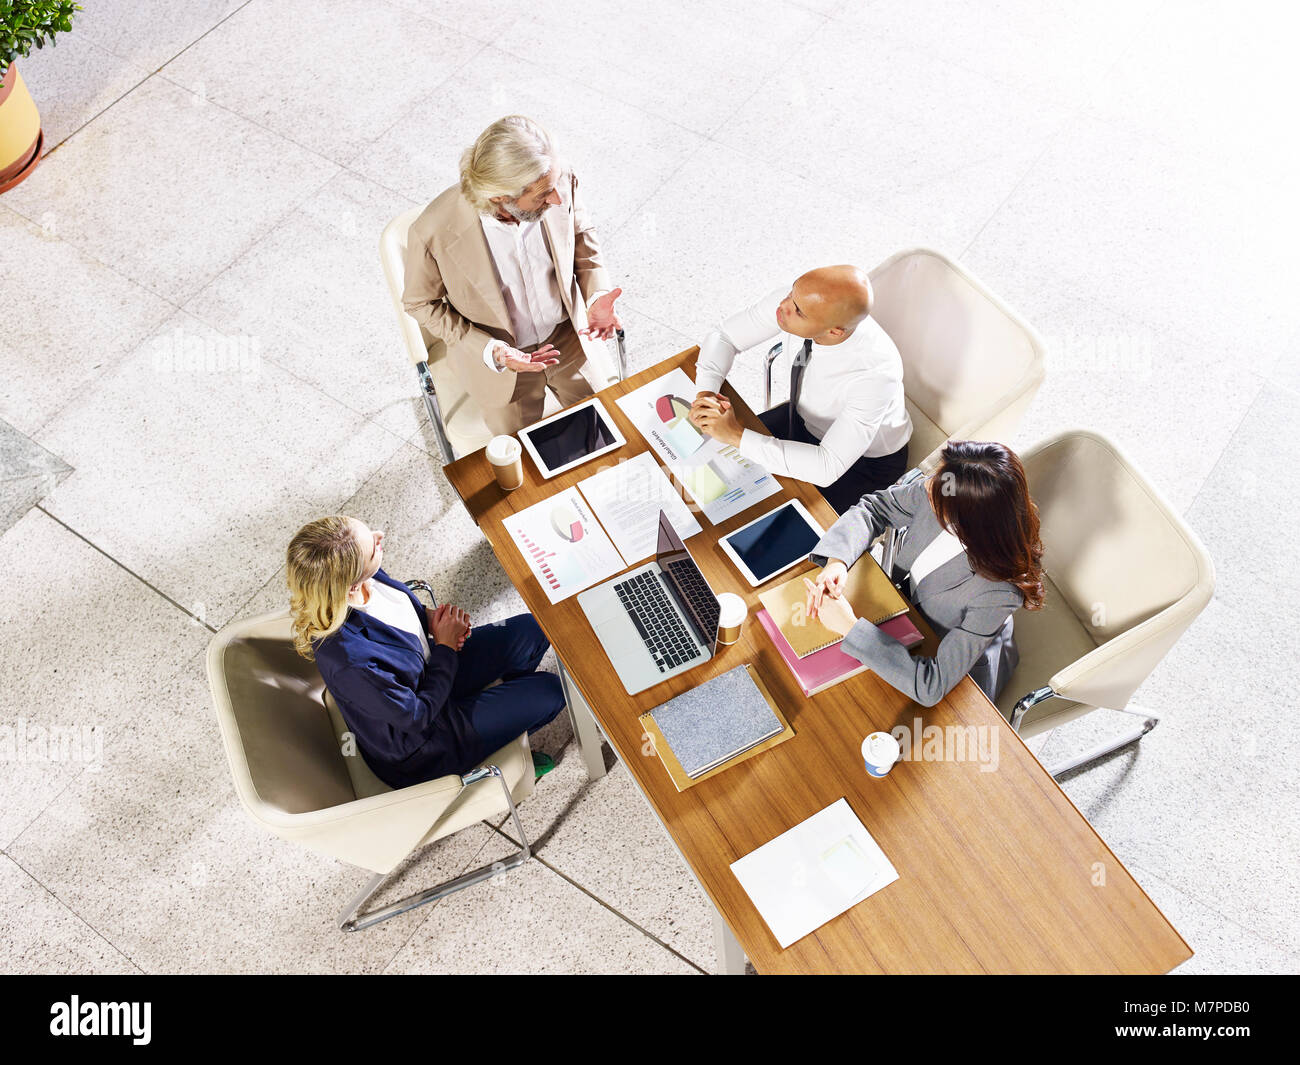 four multi-ethnic coporate business people meeting in modern office building, high angle view. Stock Photo